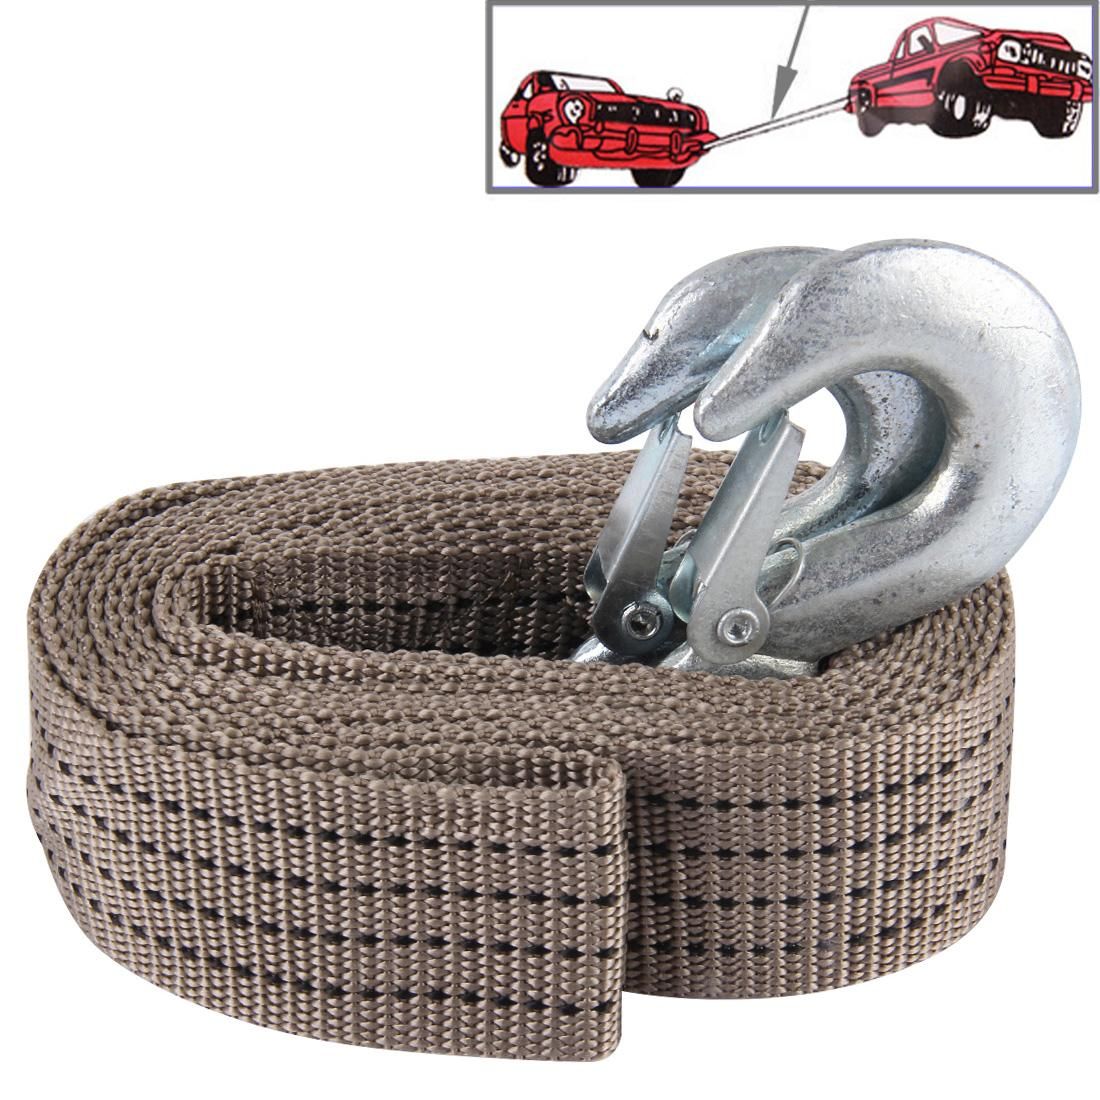 ZONGYUAN 3m�4cm 3 Ton Car Towing Rope Straps with Two Hooks High Strength Cable Cord Heavy Duty Recovery Securing Accessories for Cars Trucks (Grey)